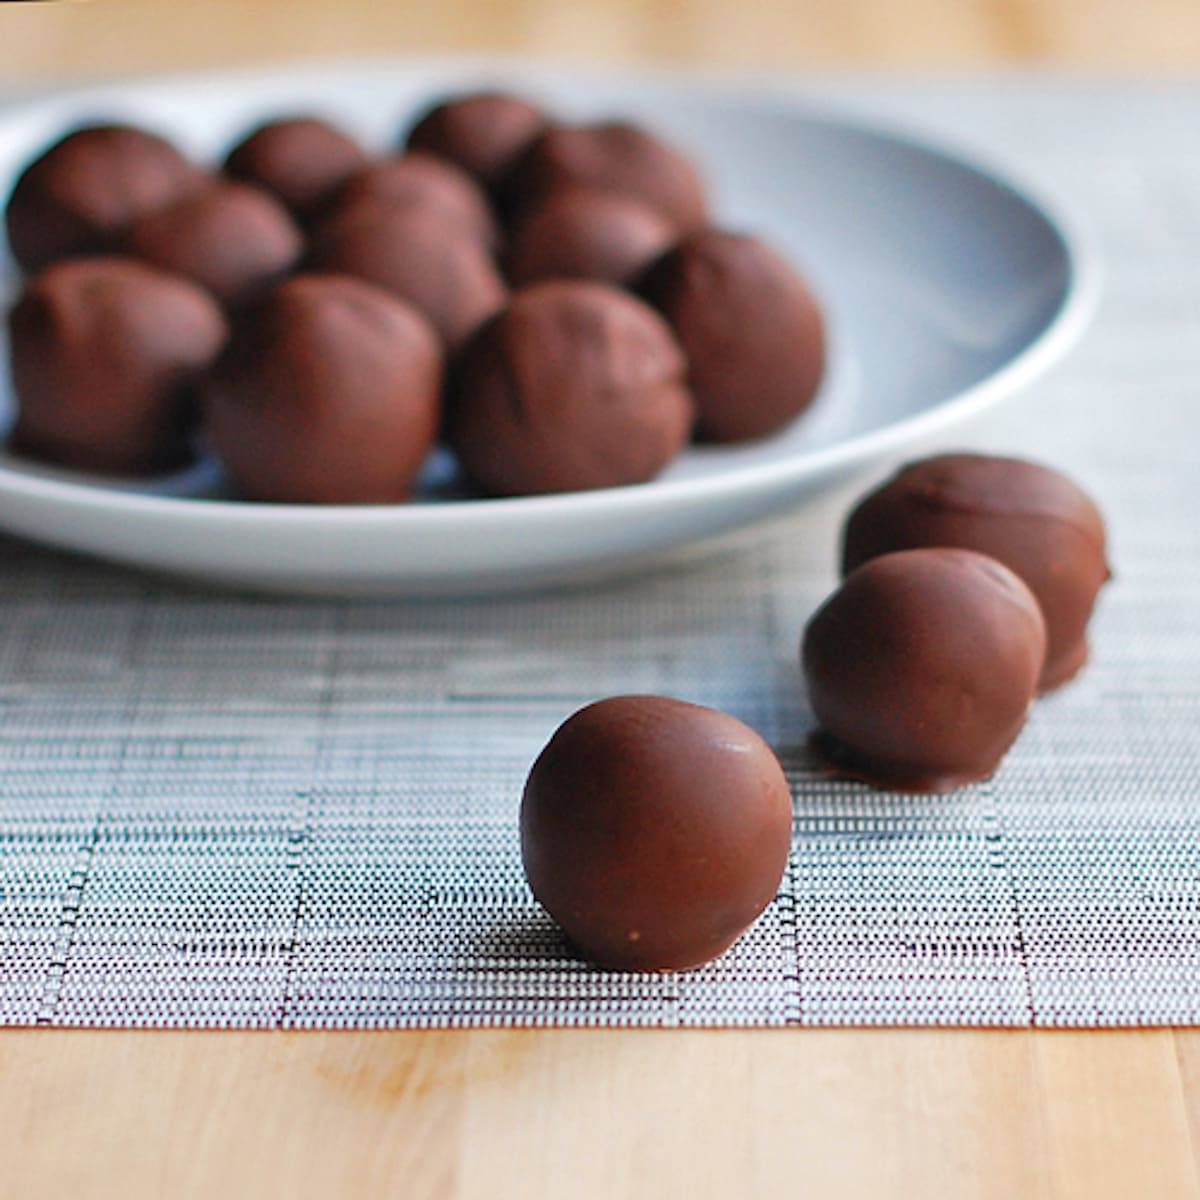 Triple chocolate party balls on a plate and a placemat.